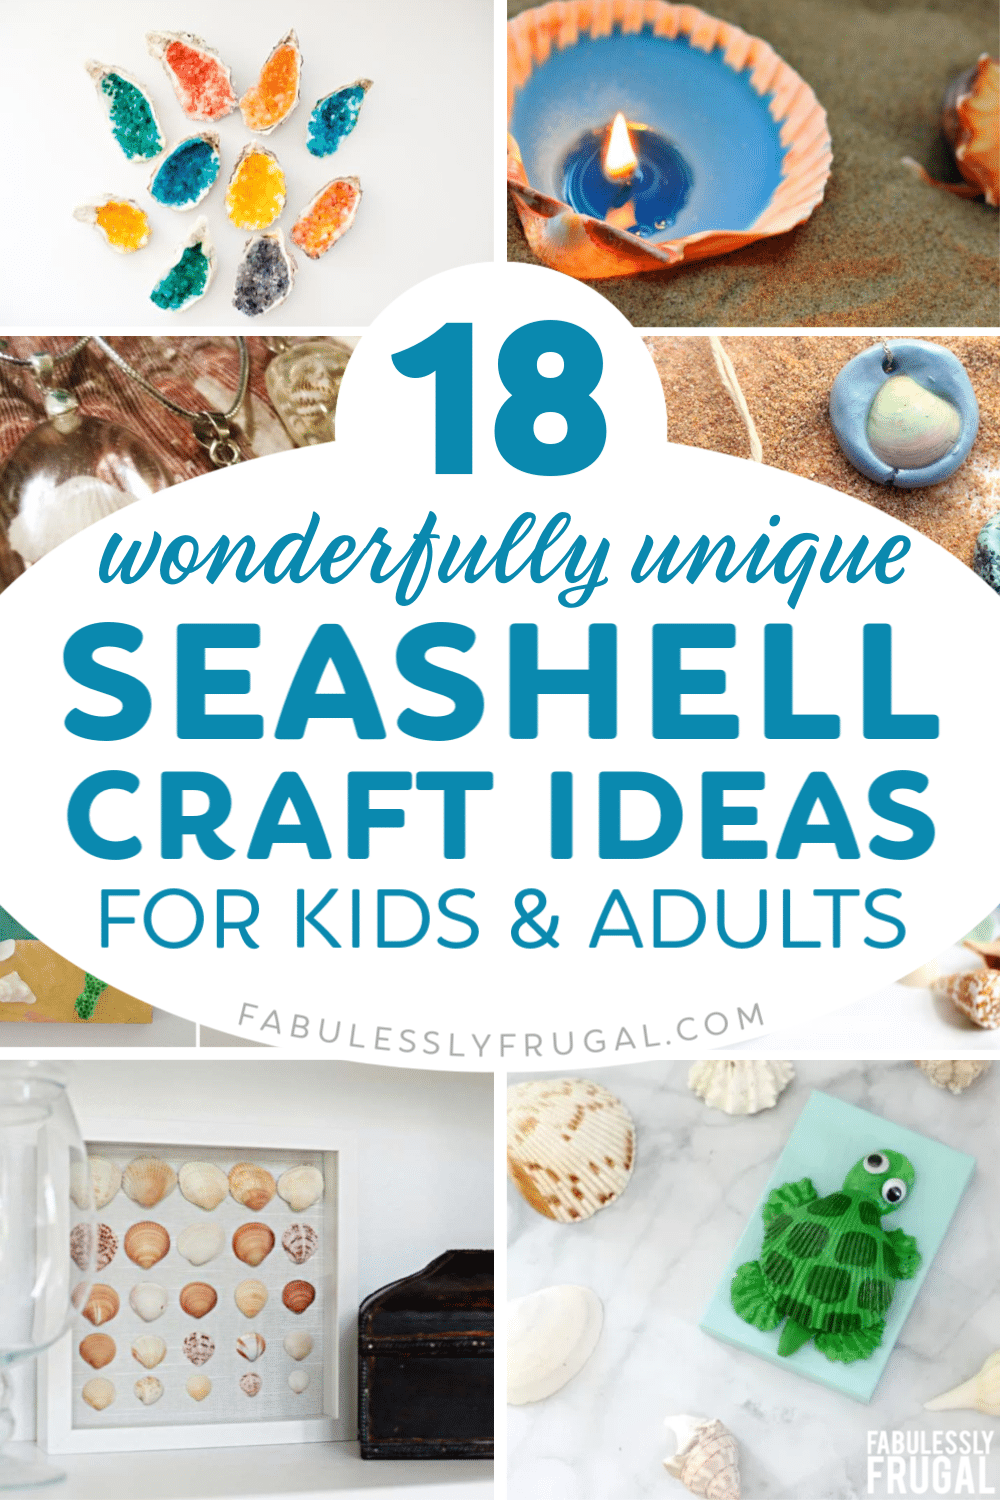 Seashell crafts for kids